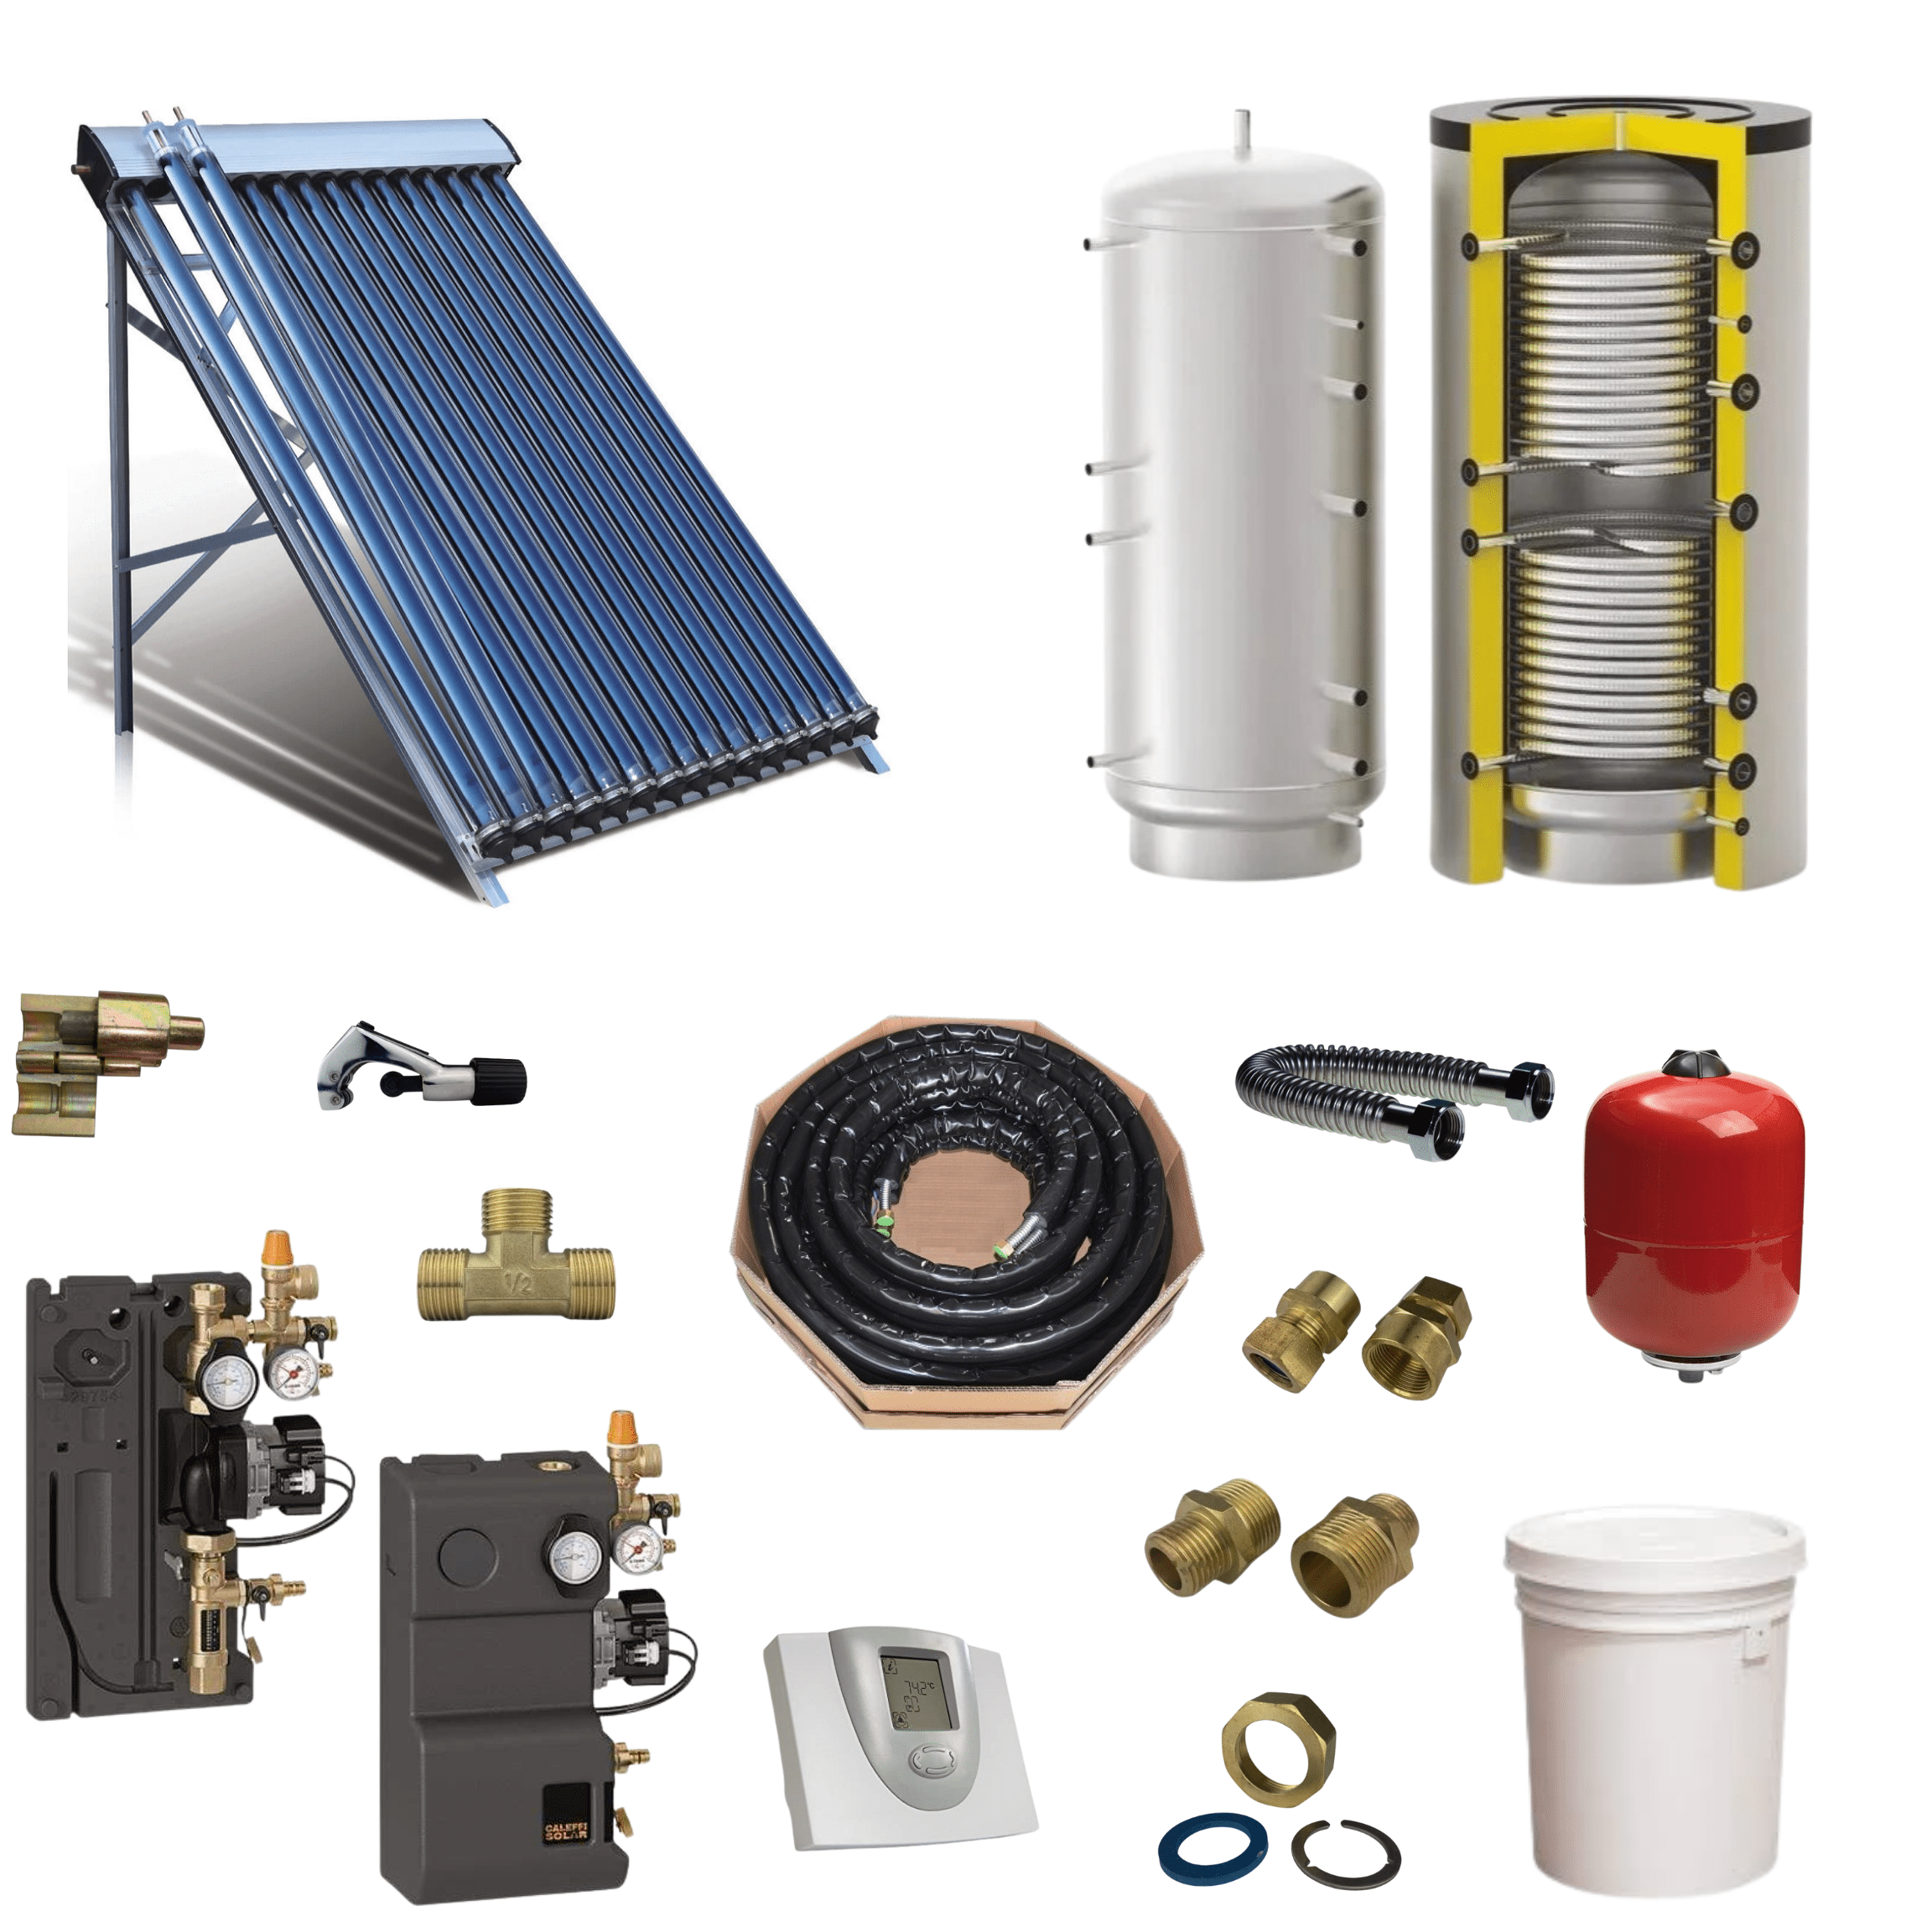 Closed Loop Solar Water heater Kit with 1x30 Tubes Collector, 200L Storage Tank and selected options